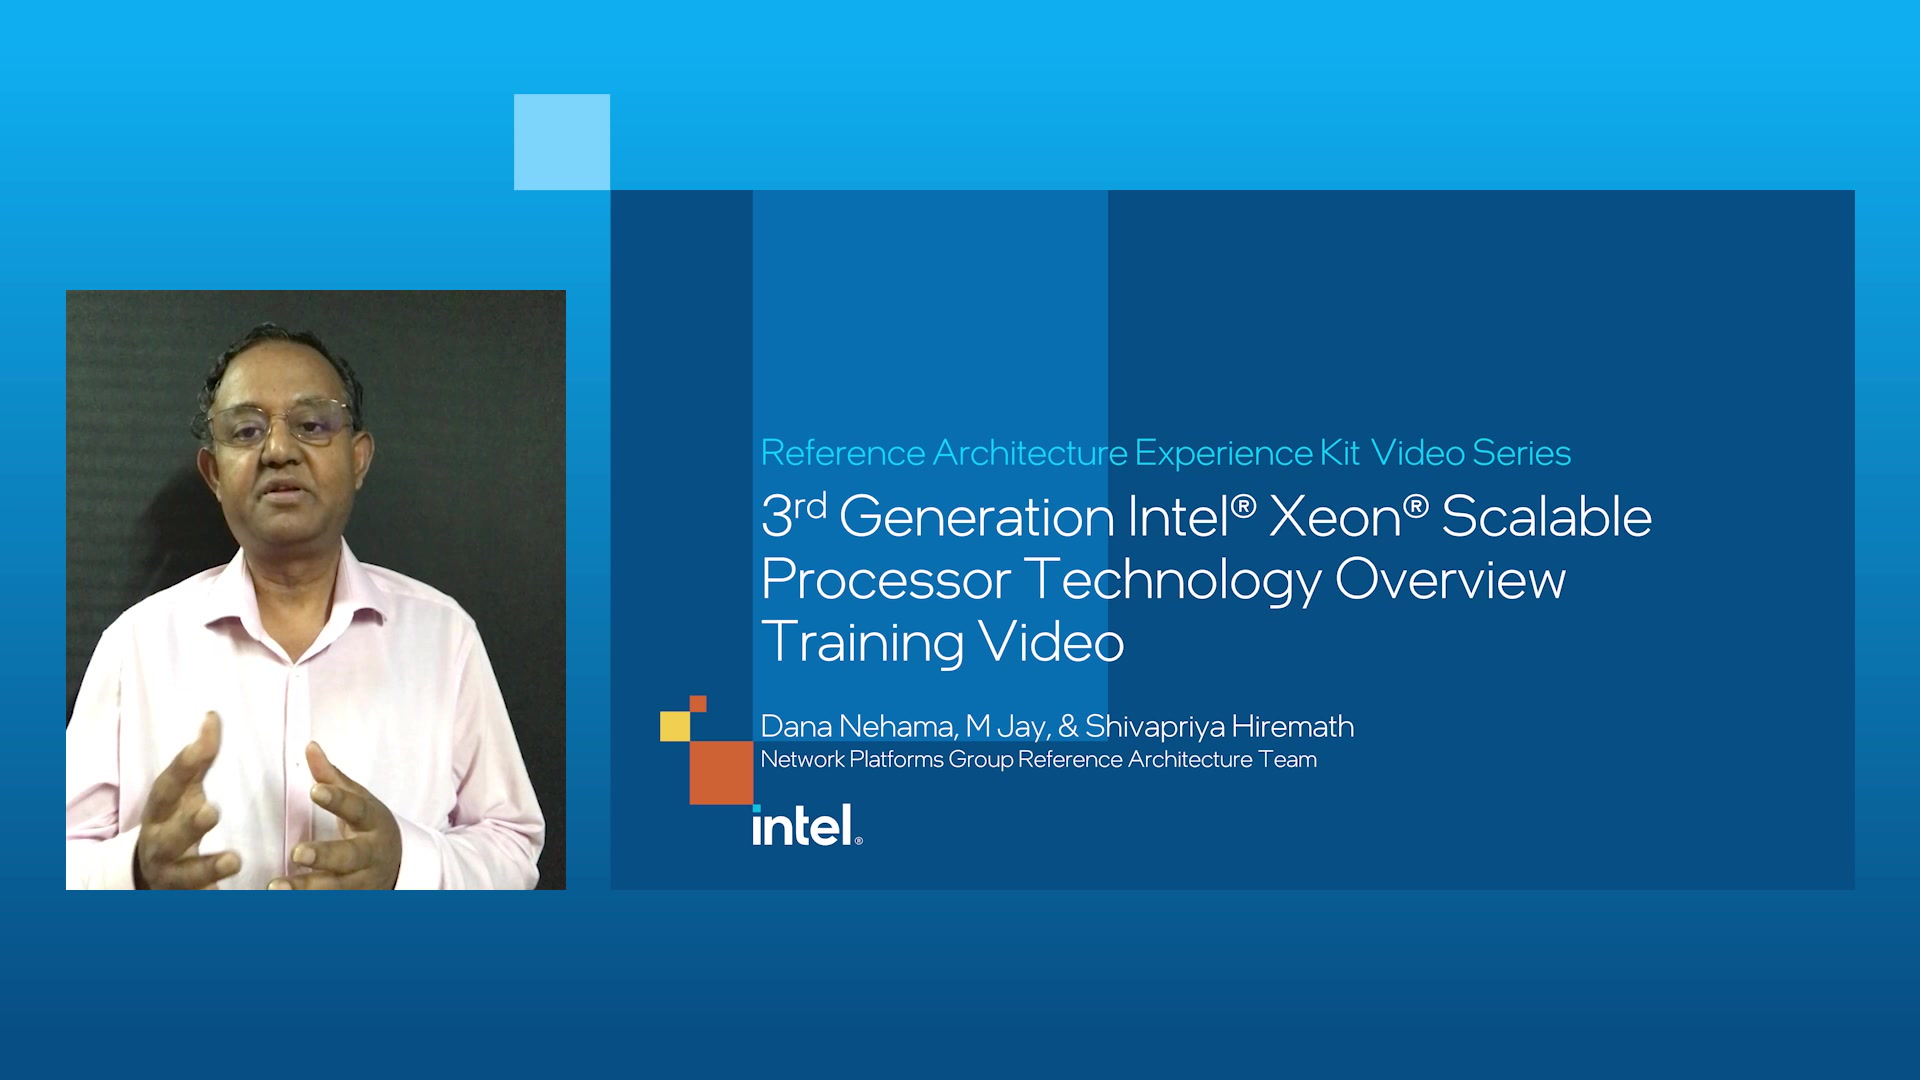 3rd Generation Intel® Xeon® Scalable Processor Technology Overview